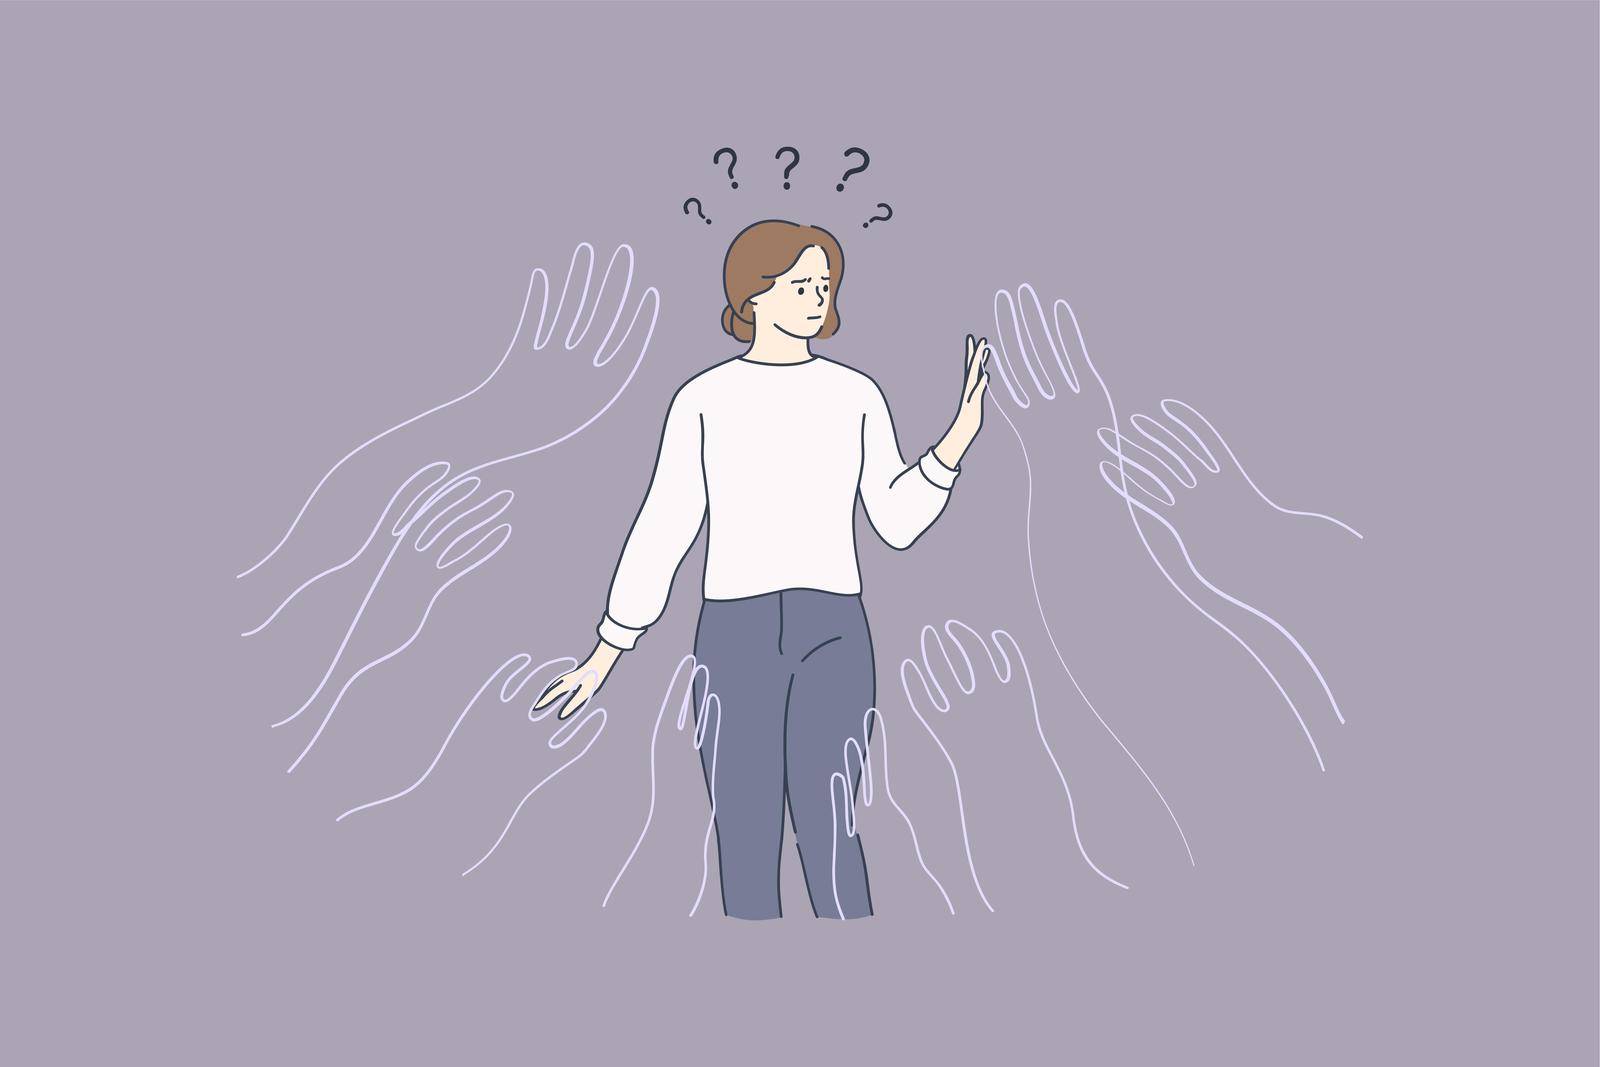 Psychological influence, manipulation, addiction concept. Young frustrated woman cartoon character standing surrounded by giant creeping hands feeling influence and doubting what to choose